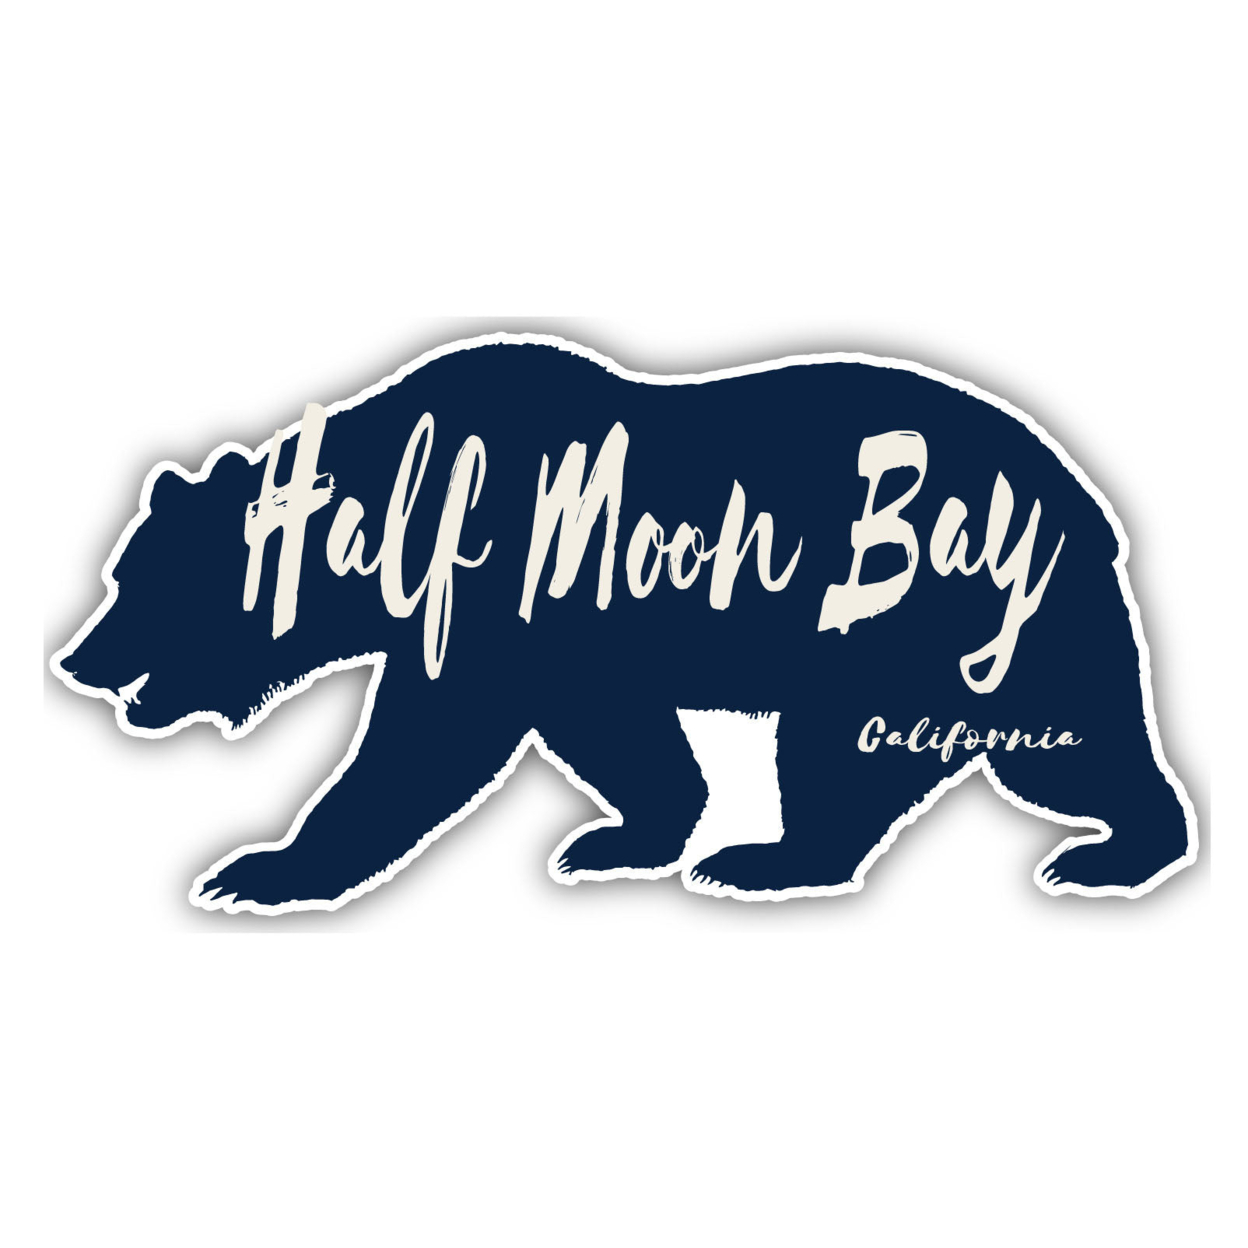 Half Moon Bay California Souvenir Decorative Stickers (Choose Theme And Size) - 4-Pack, 4-Inch, Bear